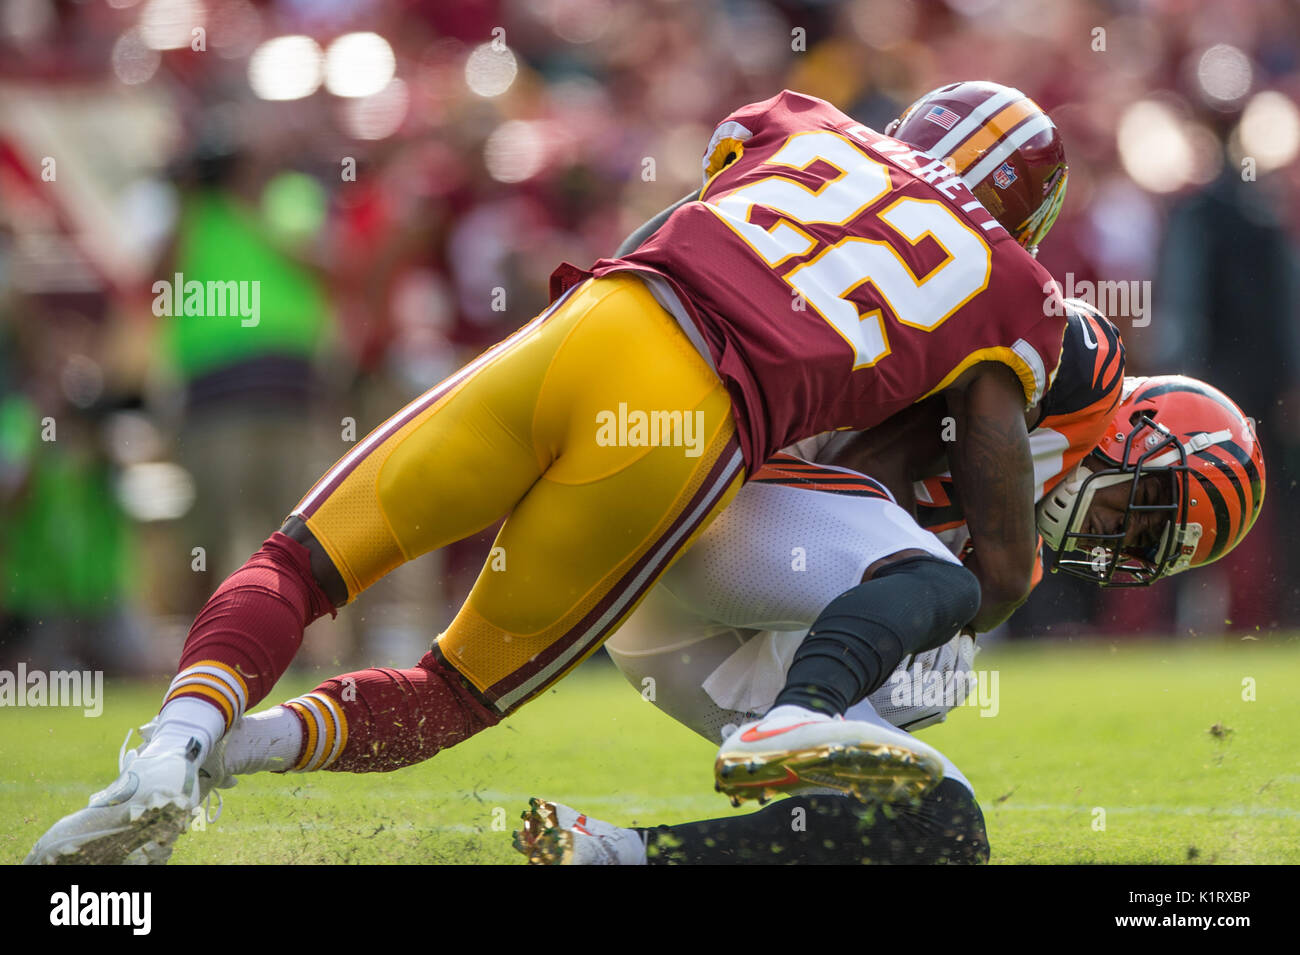 AUG 27 2017 : Washington Redskins cornerback Deshazor Everett (22) tackles Cincinnati Bengals wide receiver A.J. Green (18) in the red zone during the pre-season matchup between the Cincinnati Bengals and the Washington Redskins at FedEx Field in Landover, MD. Stock Photo